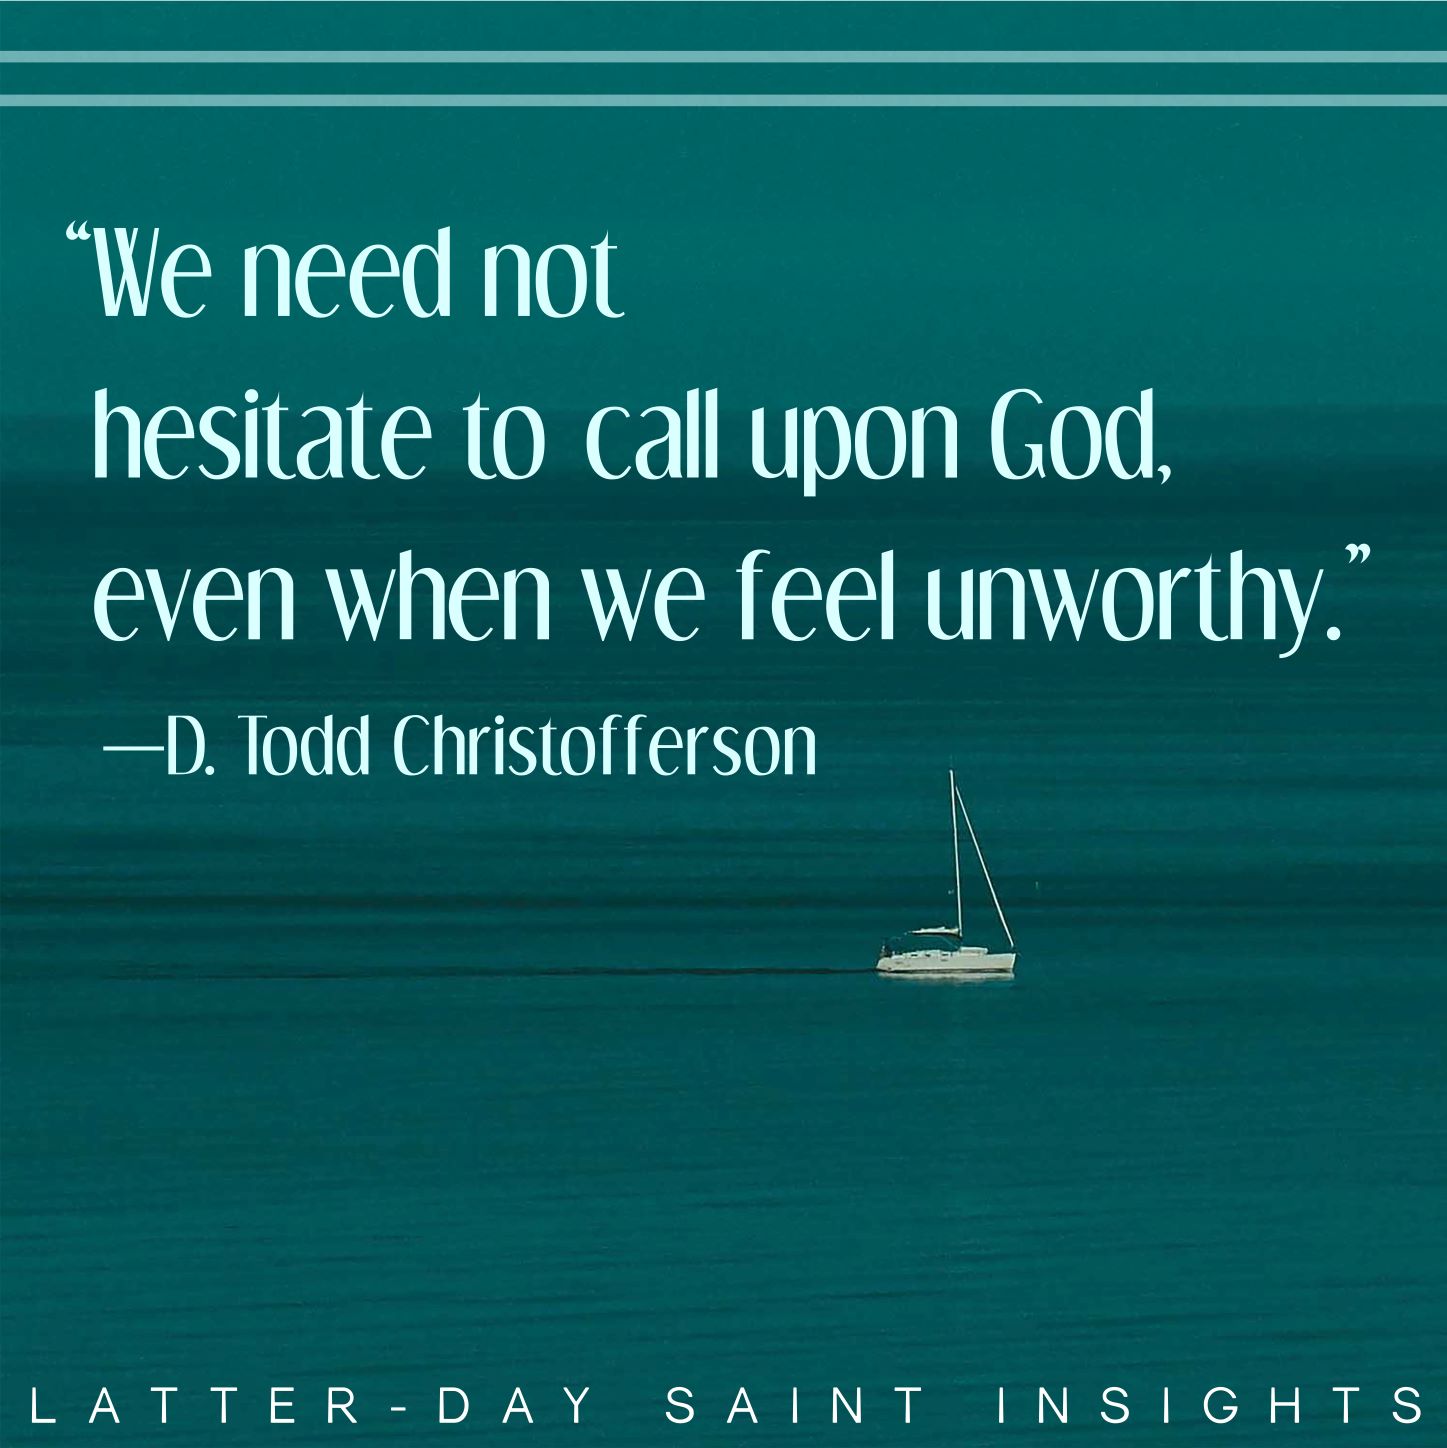 "We need not hesitate to call upon God, even when we feel unworthy." - Elder D. Todd Christofferson